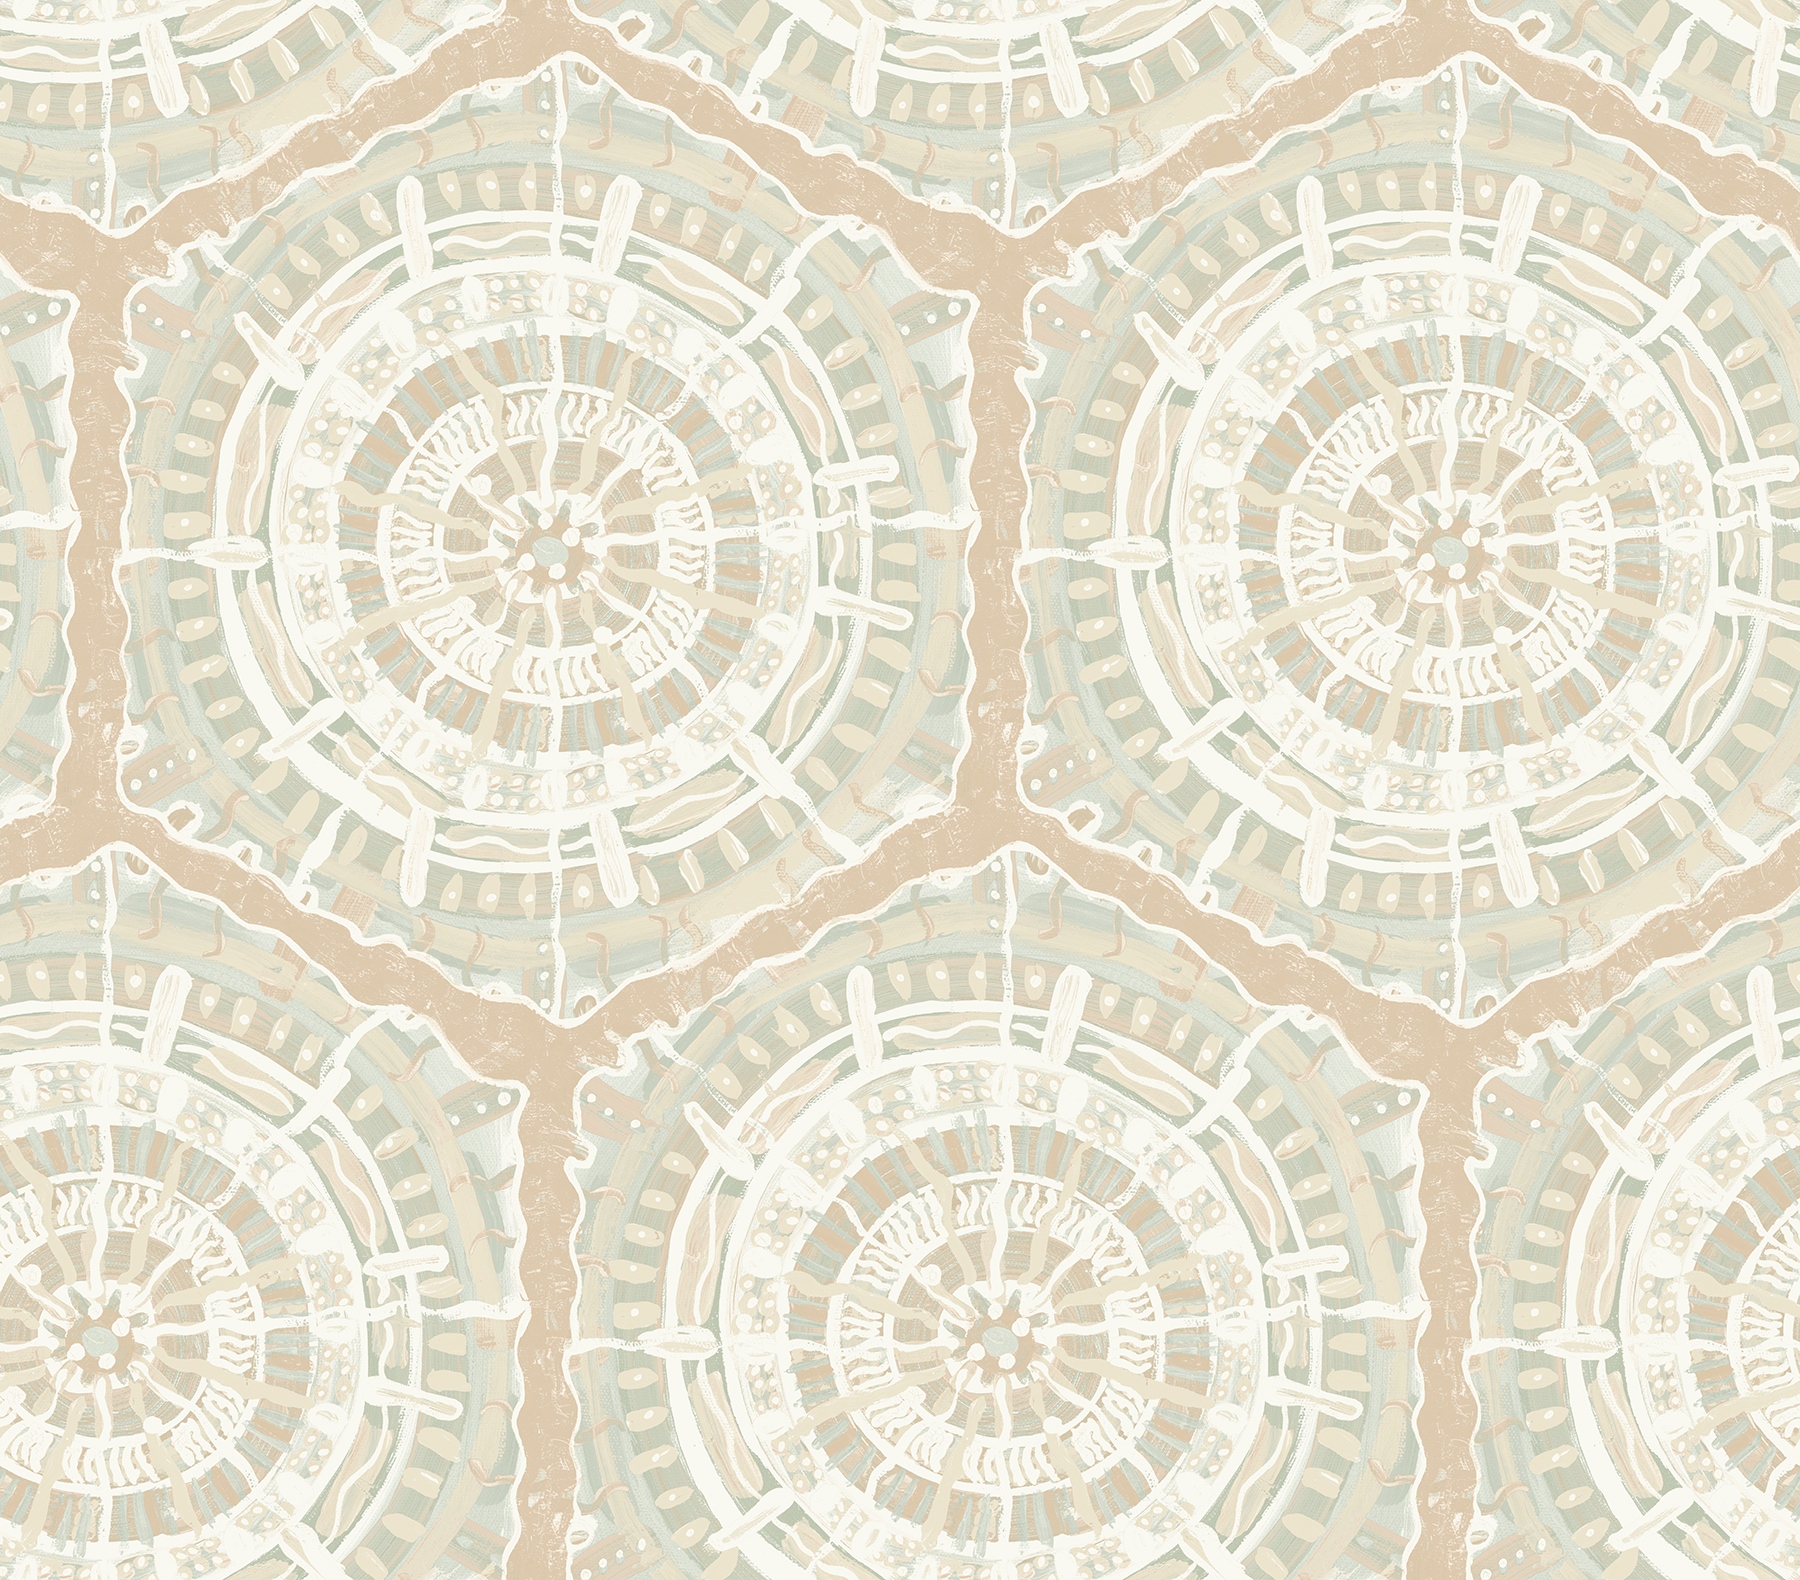 Emulate the warm glow of the sun in your home with this stunning geometric wallpaper by Lisa Whittington. The hexagonal design is outlined using a fresh peach hue, shimmering accents throughout the piece adding warmth to your space. Peach Harmony Peel and Stick Wallpaper comes on one roll that measures 20.5 inches wide by 18 feet long.